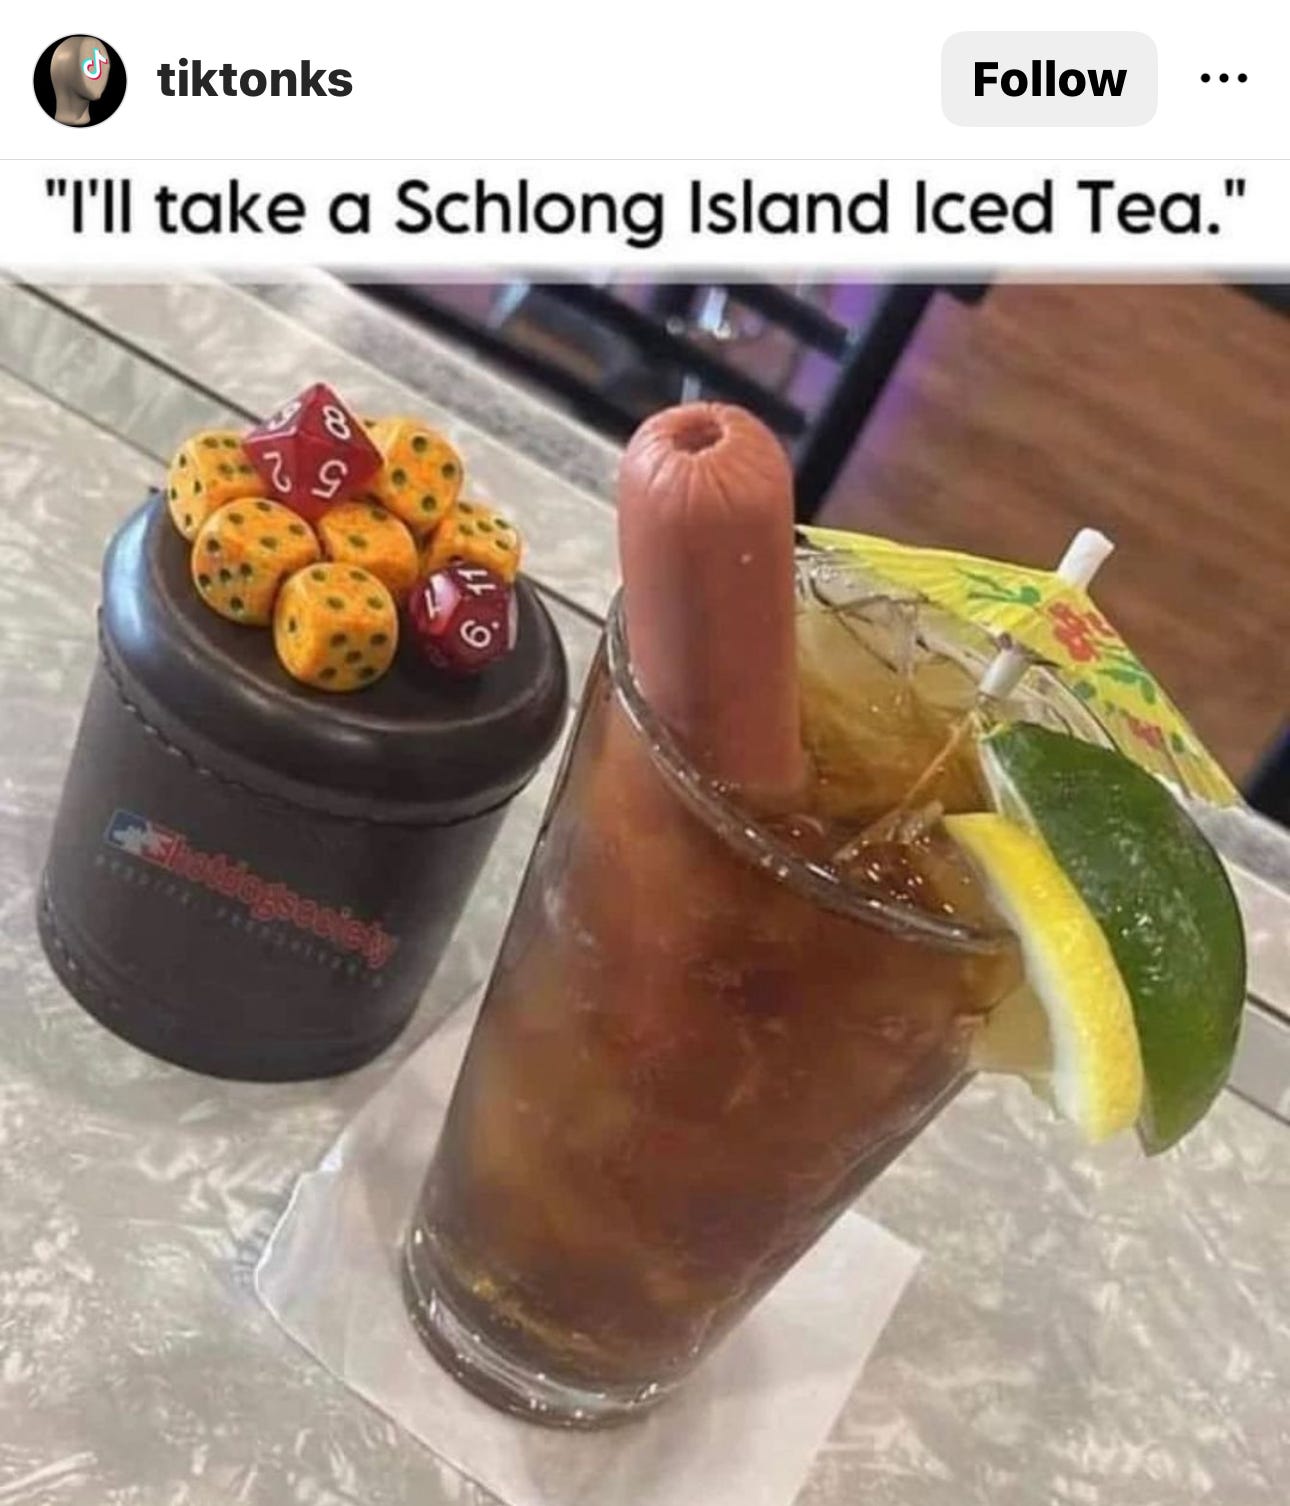 A drink that looks like a Long Island Iced Tea with a slice of lemon and lime on the rim and a cocktail umbrella and hot dog in the drink. Captioned: "I'll take a Schlong Island iced tea."